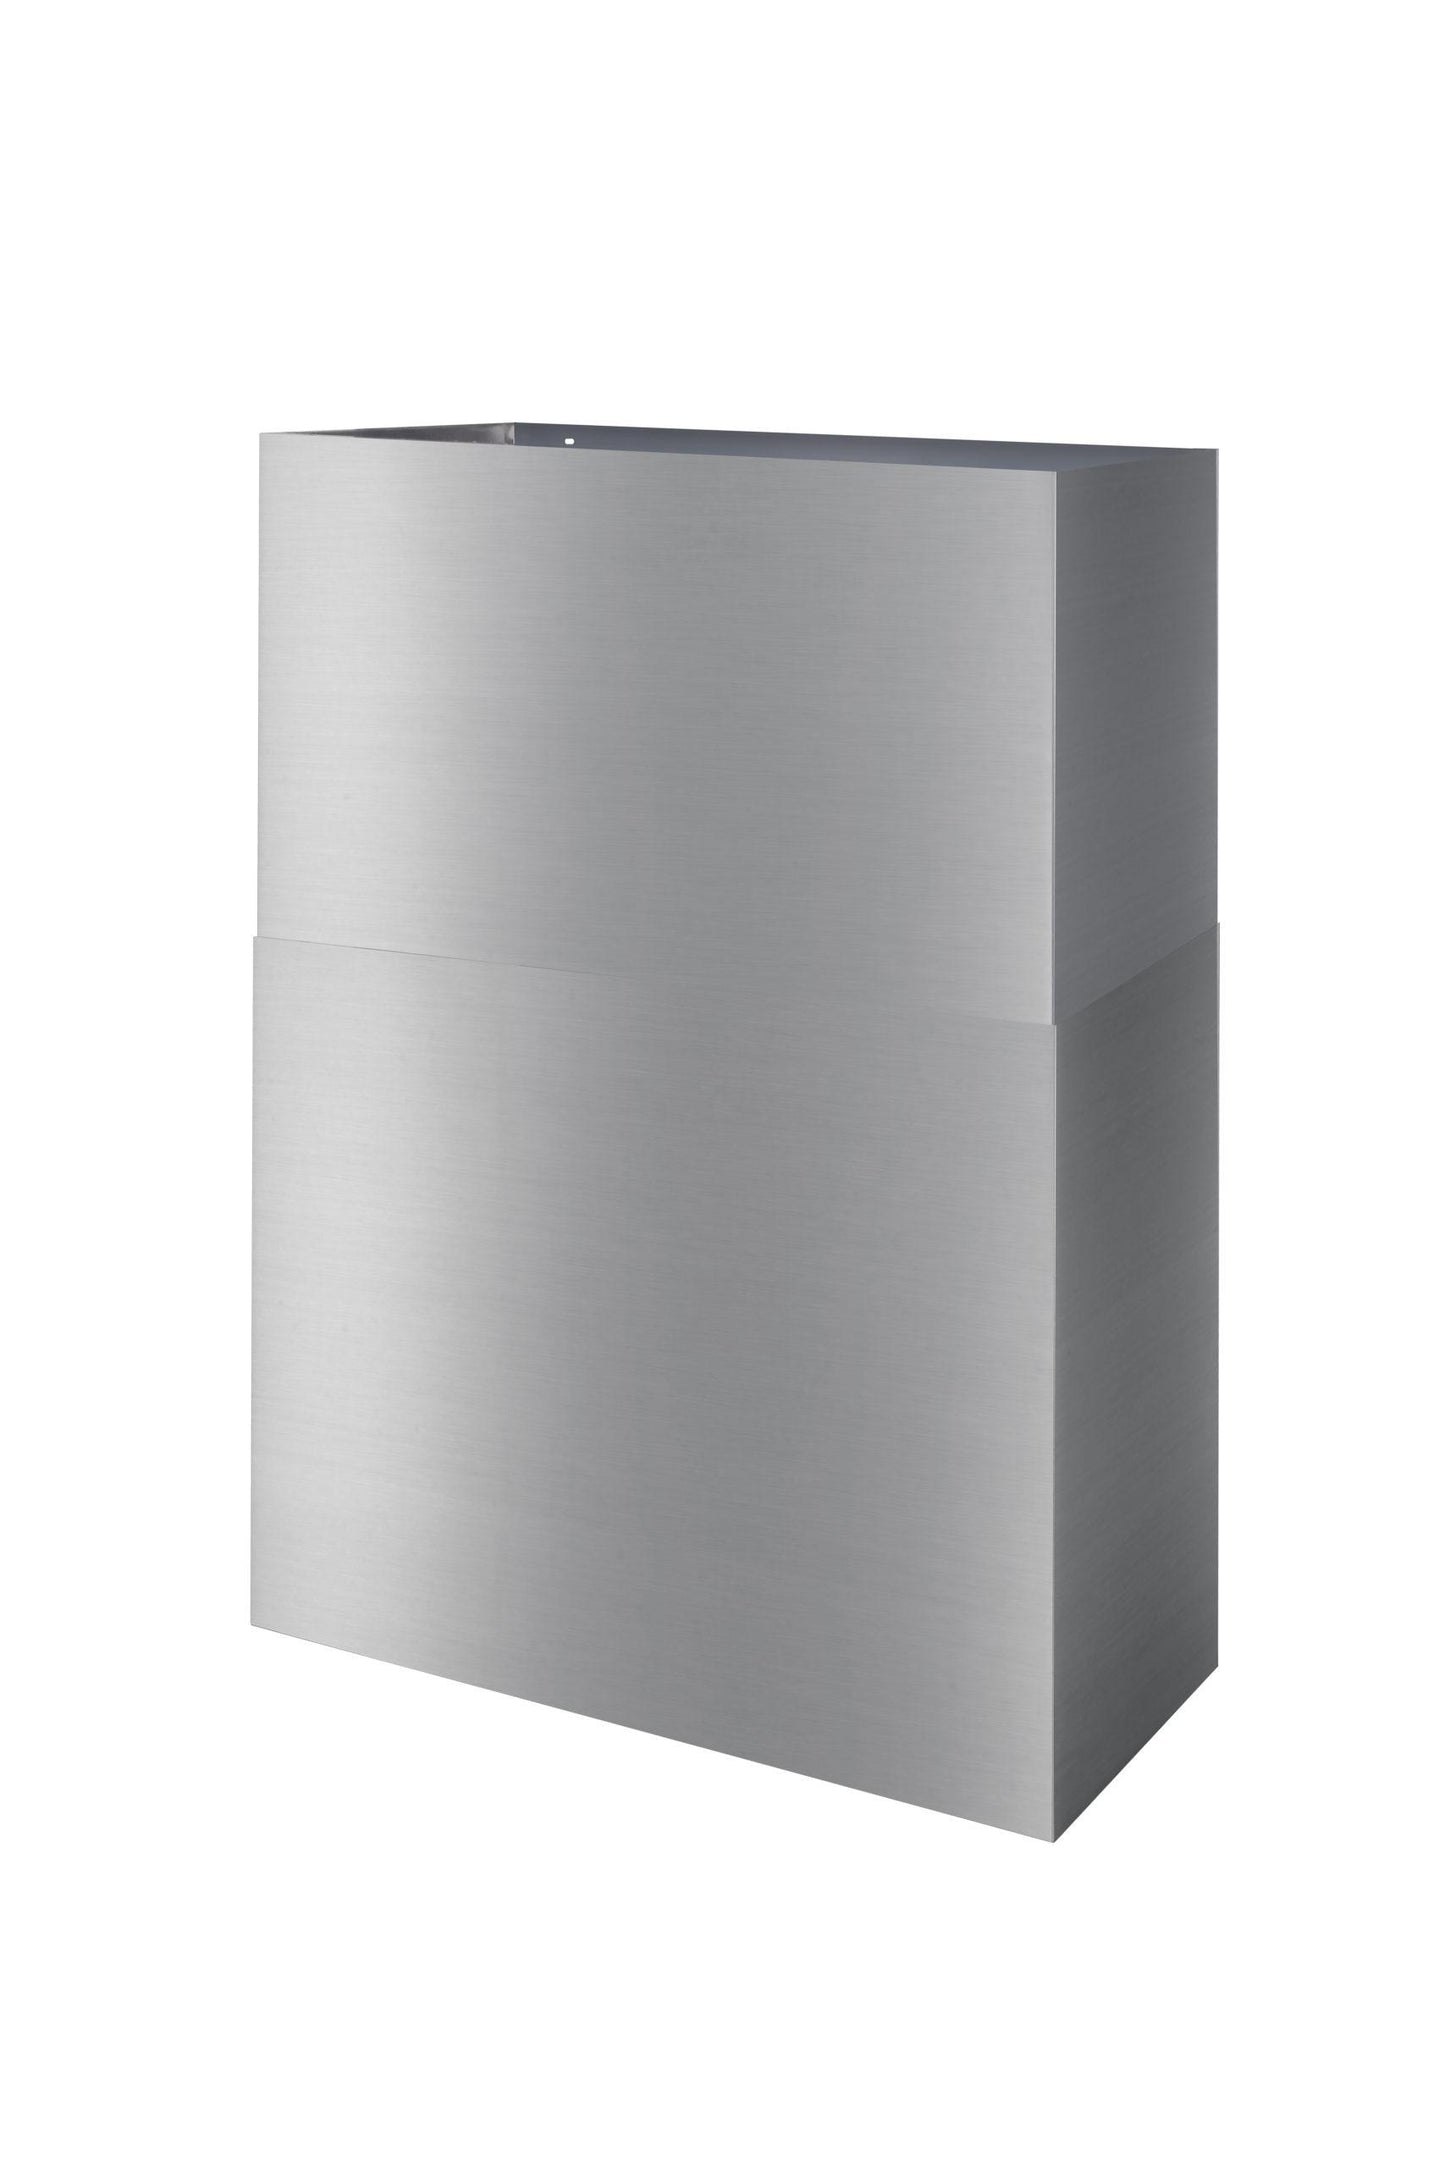 Thor Kitchen RHDC3656 36 Inch Duct Cover For Range Hood In Stainless Steel